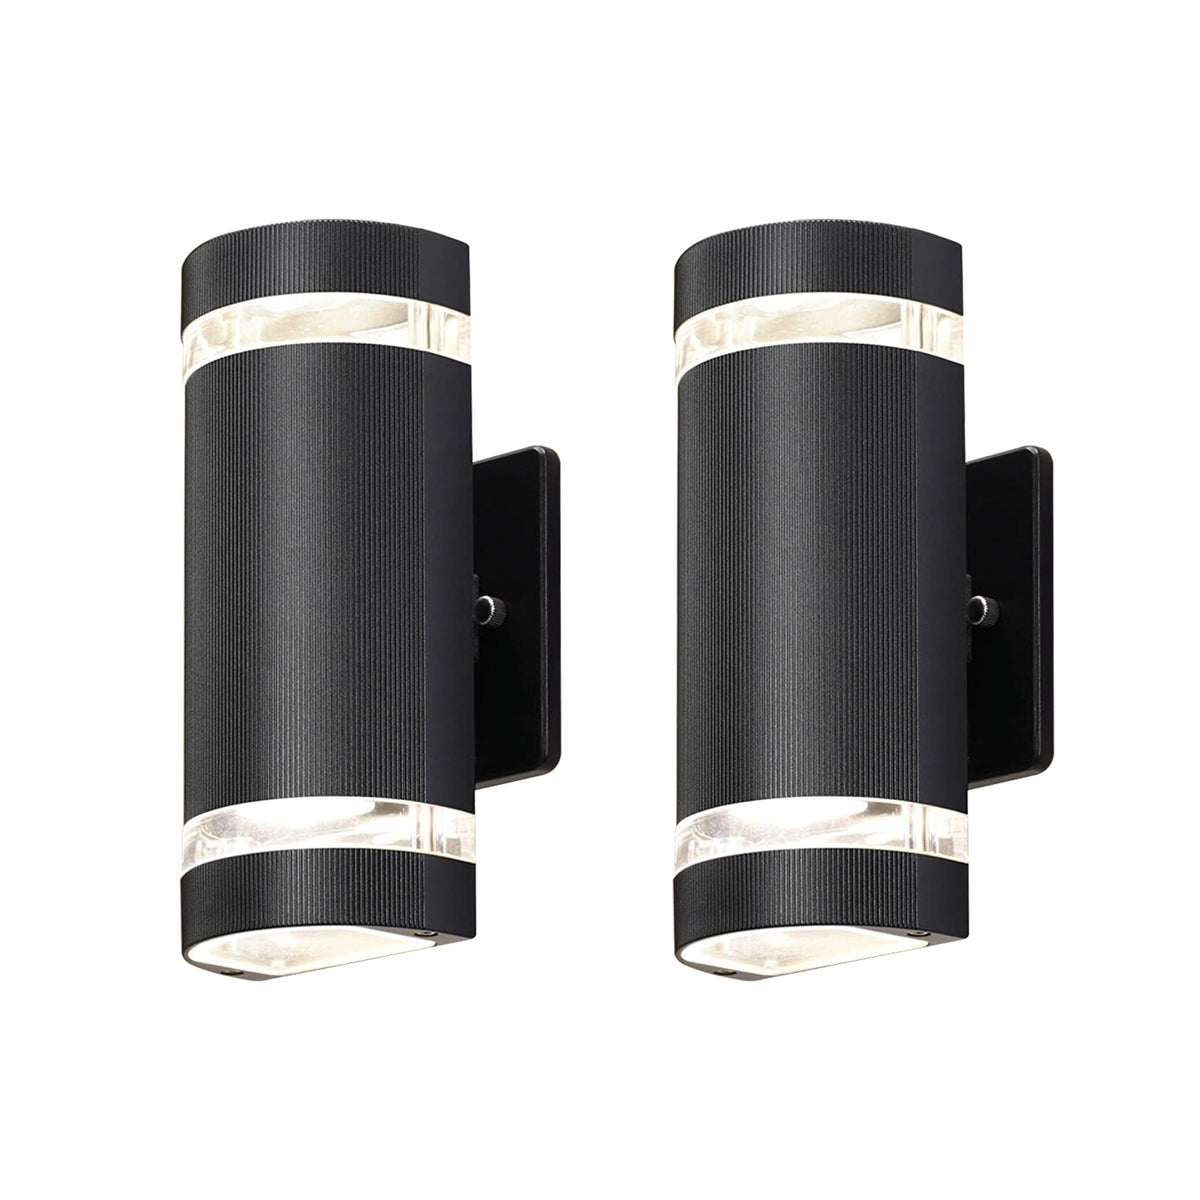 Up and Down Outdoor Wall Light, Aluminum, Waterproof, 3000K 5W with ETL, Semi Cylinder, 2PCS